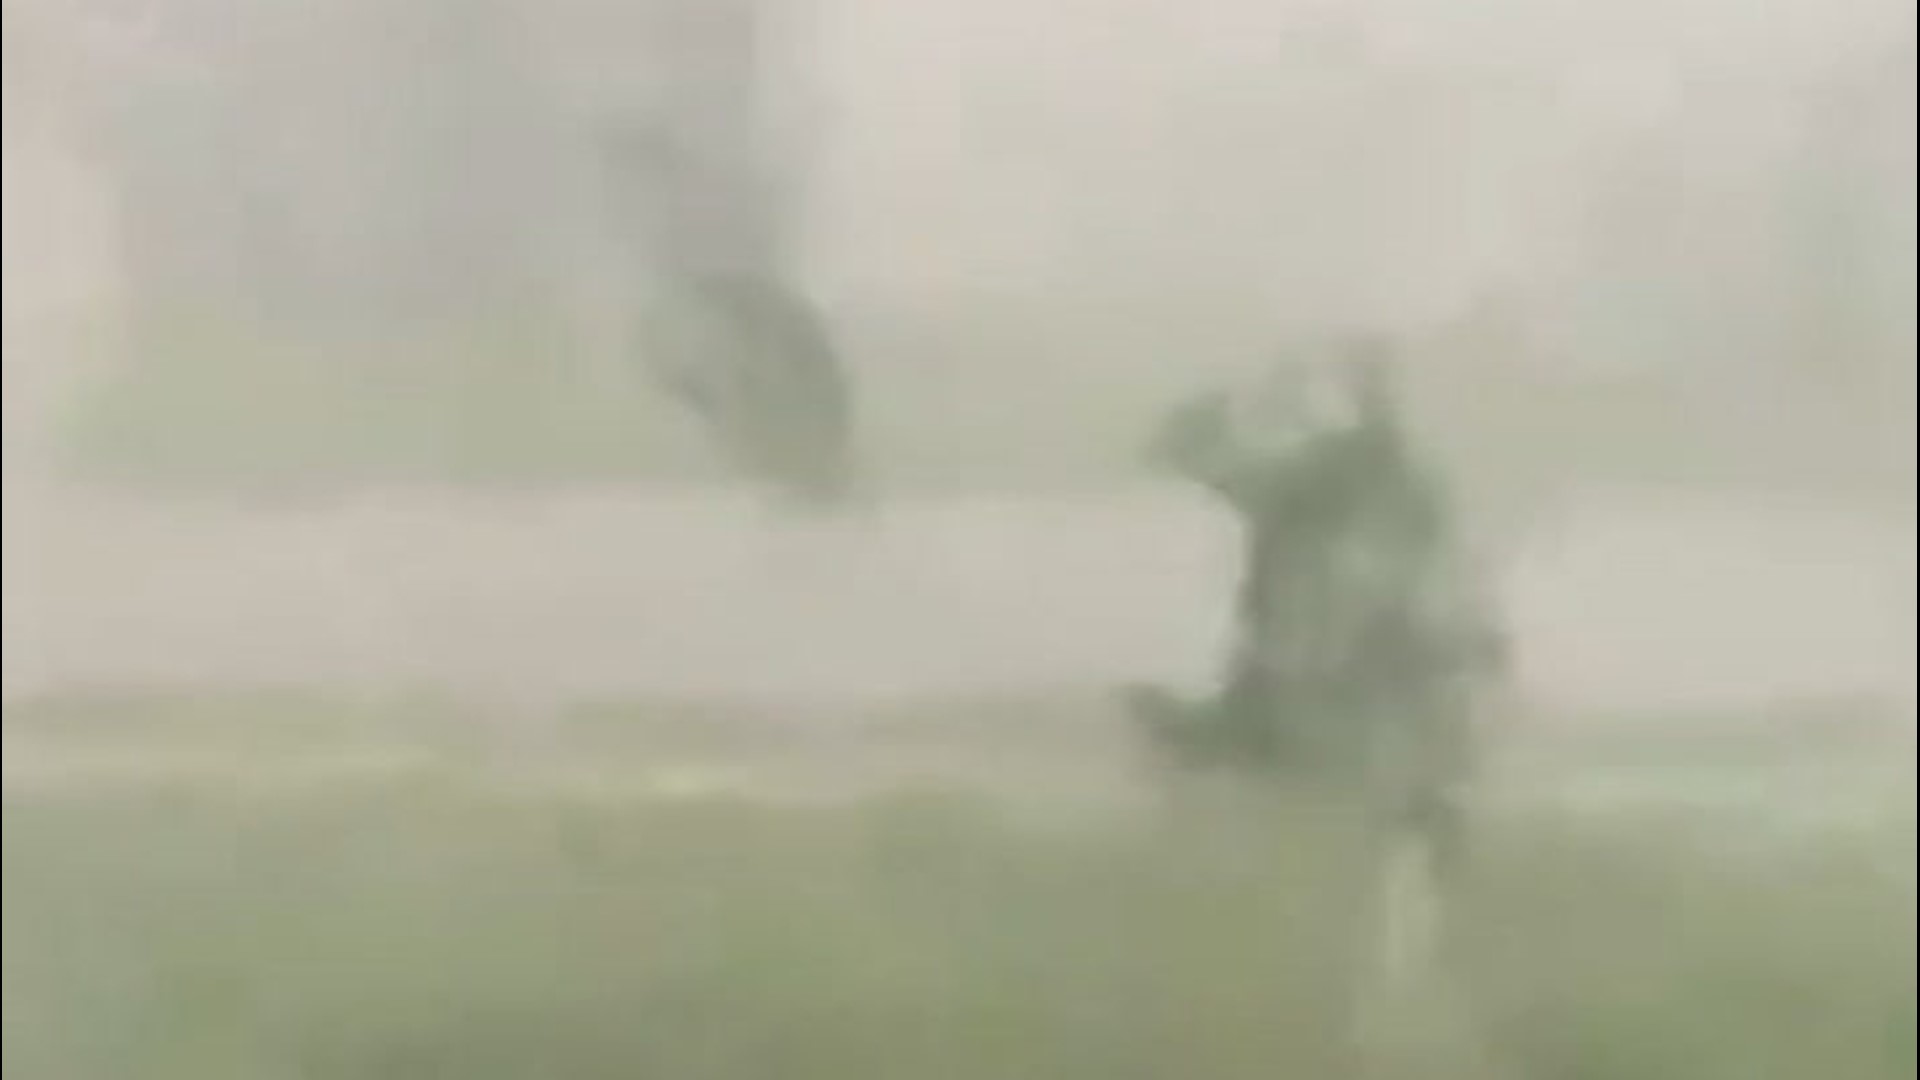 Severe storms blasted Aberdeen, South Dakota, with strong winds and hail on June 4.